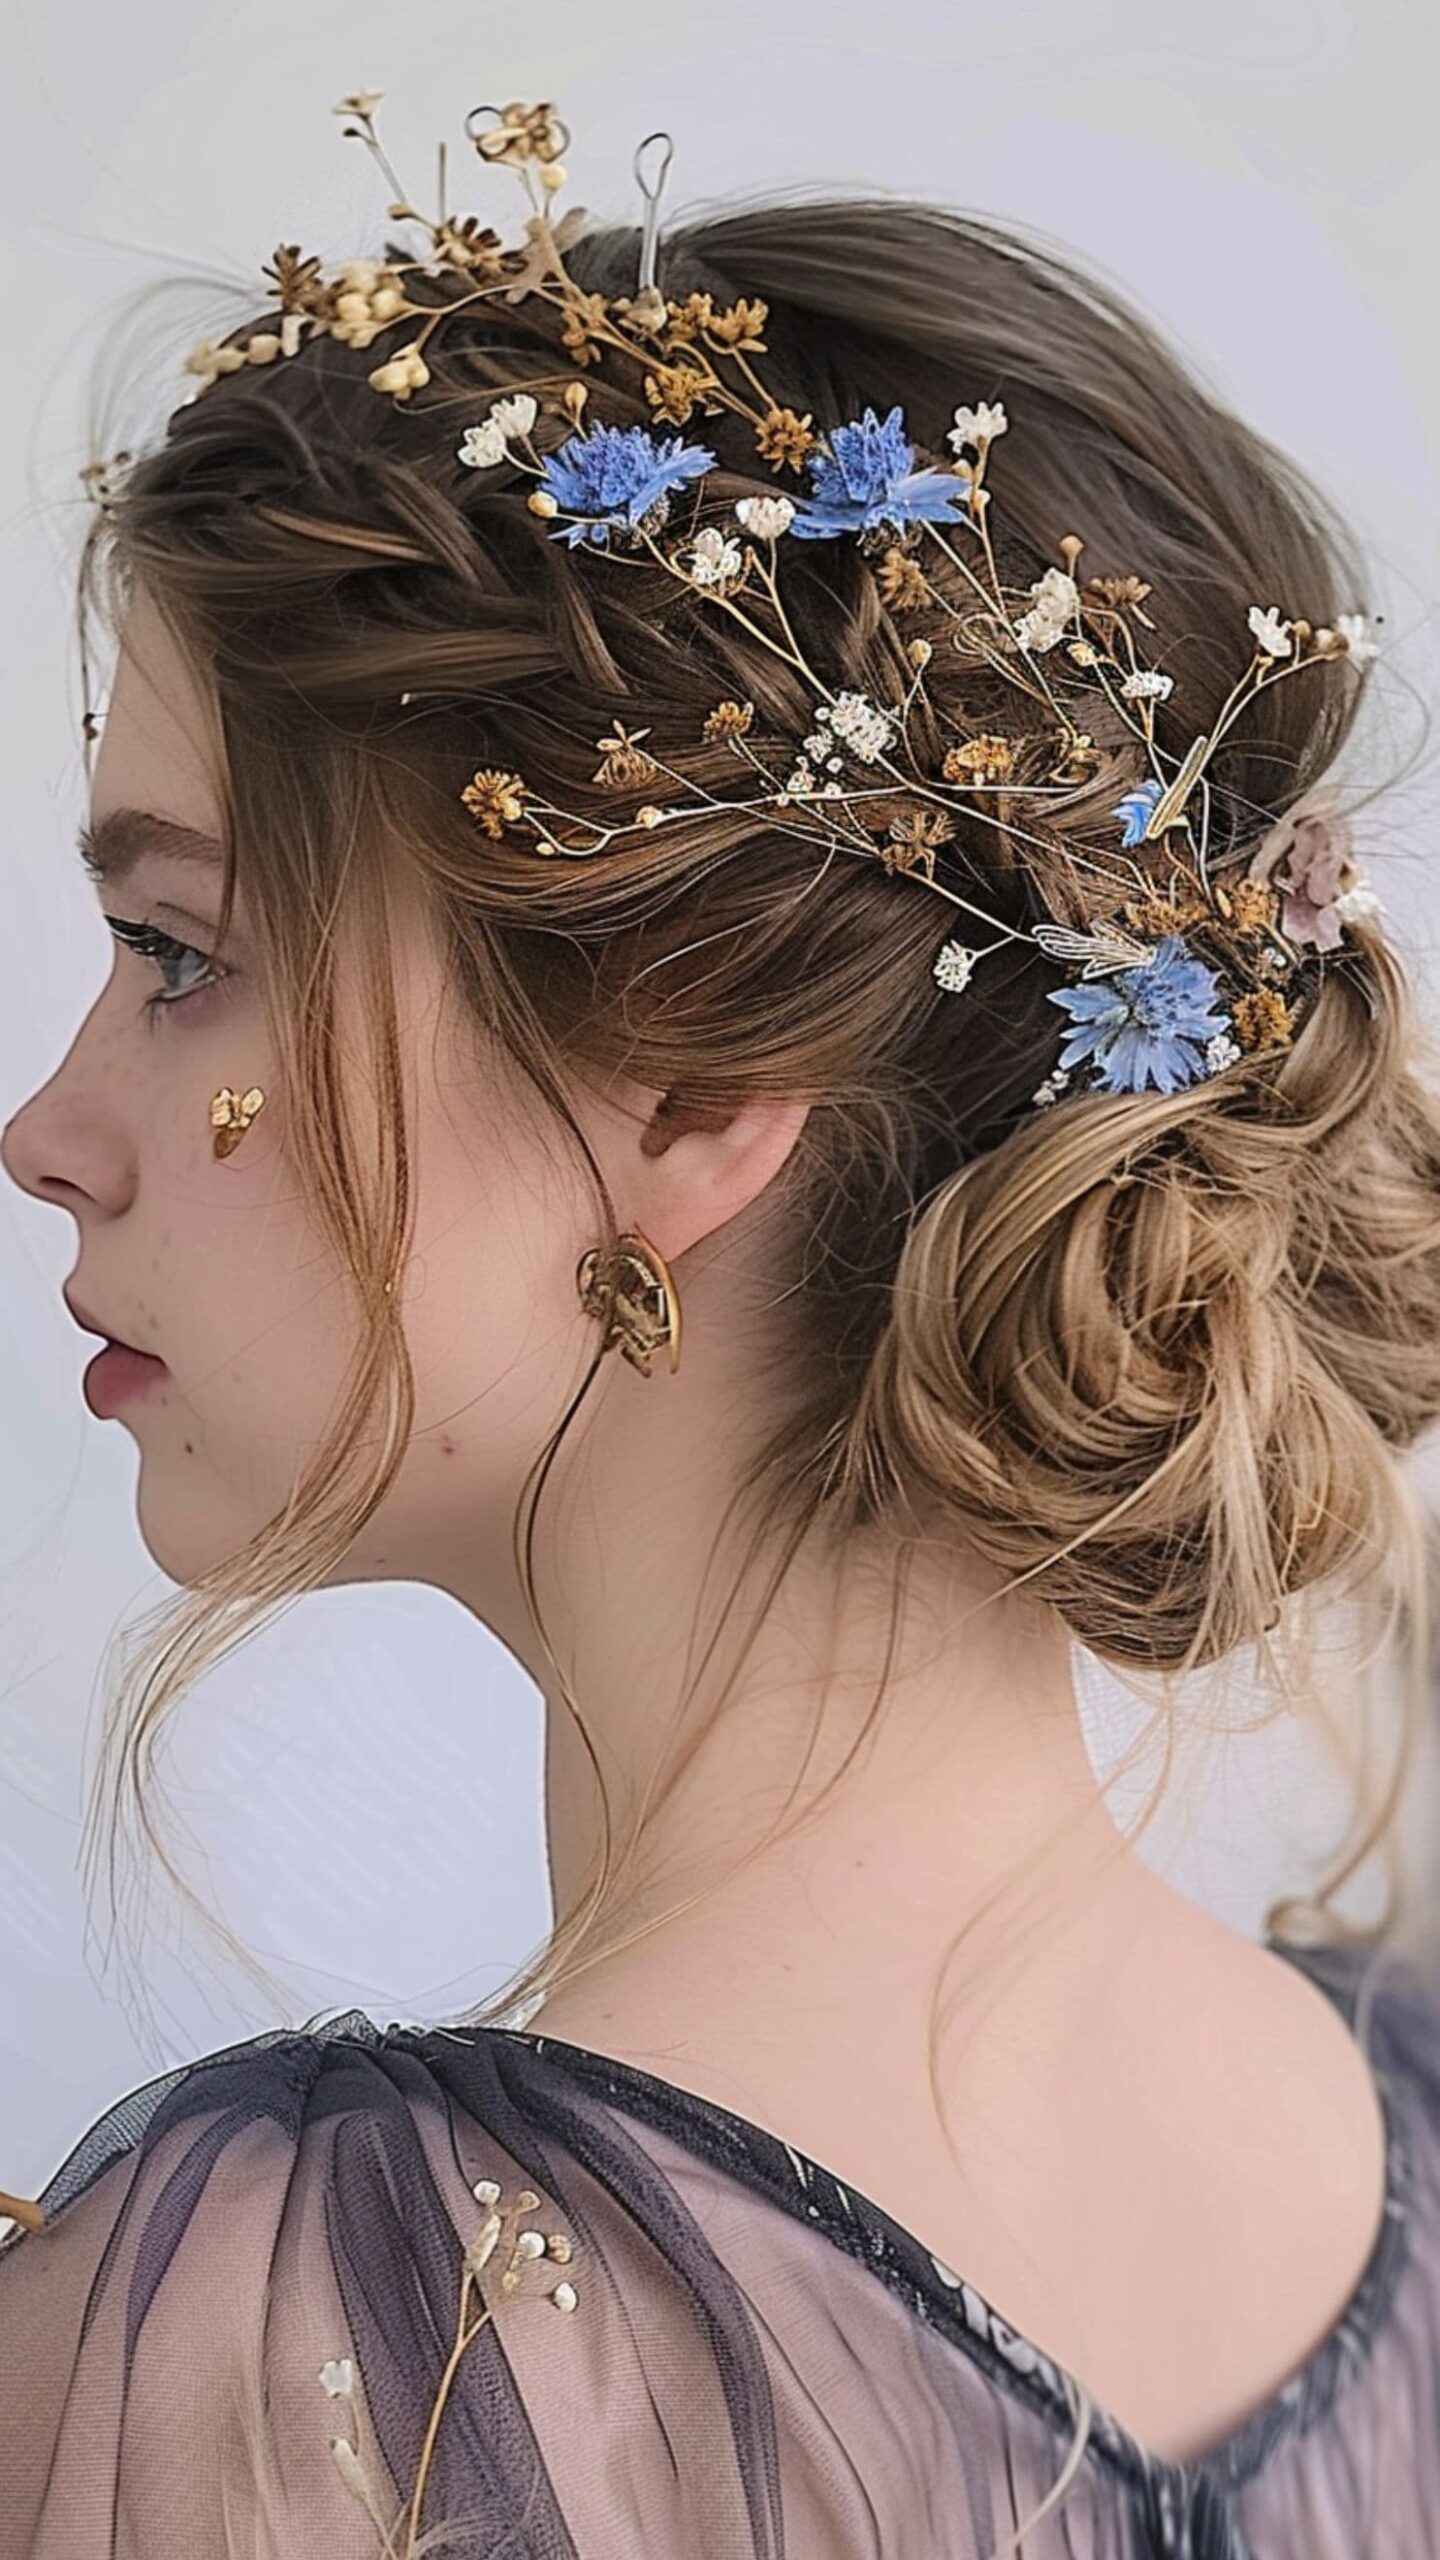 A woman modelling a crown braid with hair accessories hairstyle.